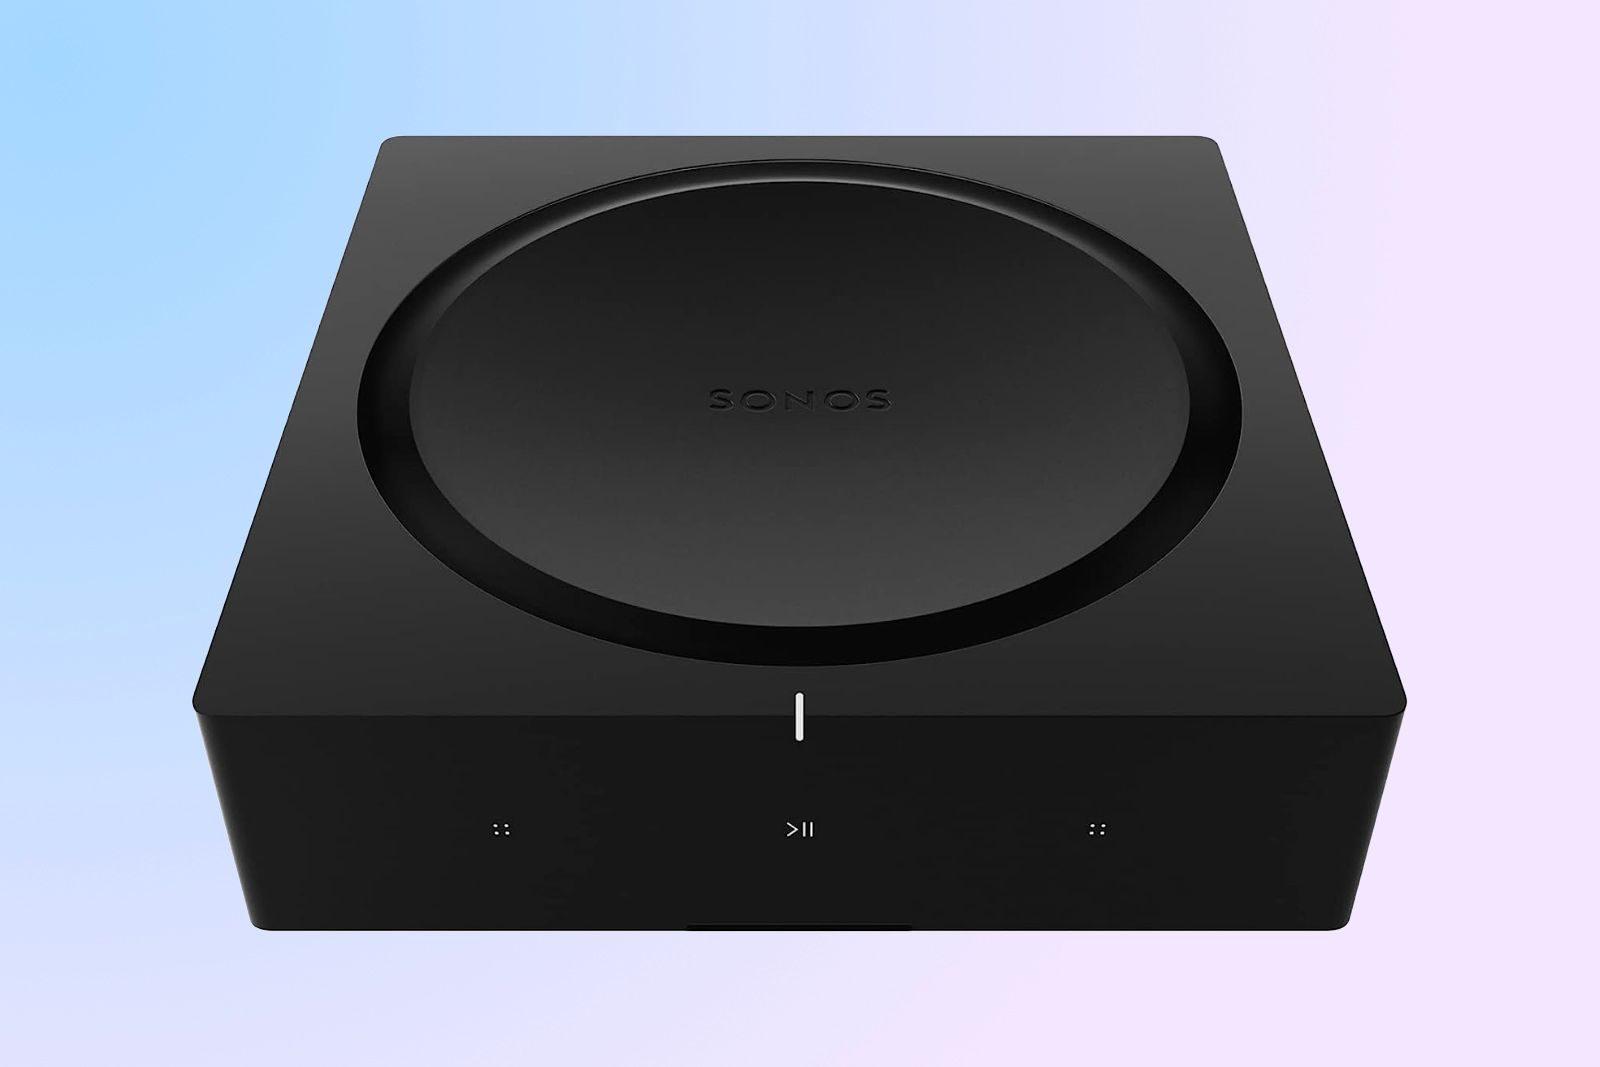 A balck square Sonos Amp with capacitive buttons on the front, and a circular cut-out on the top.